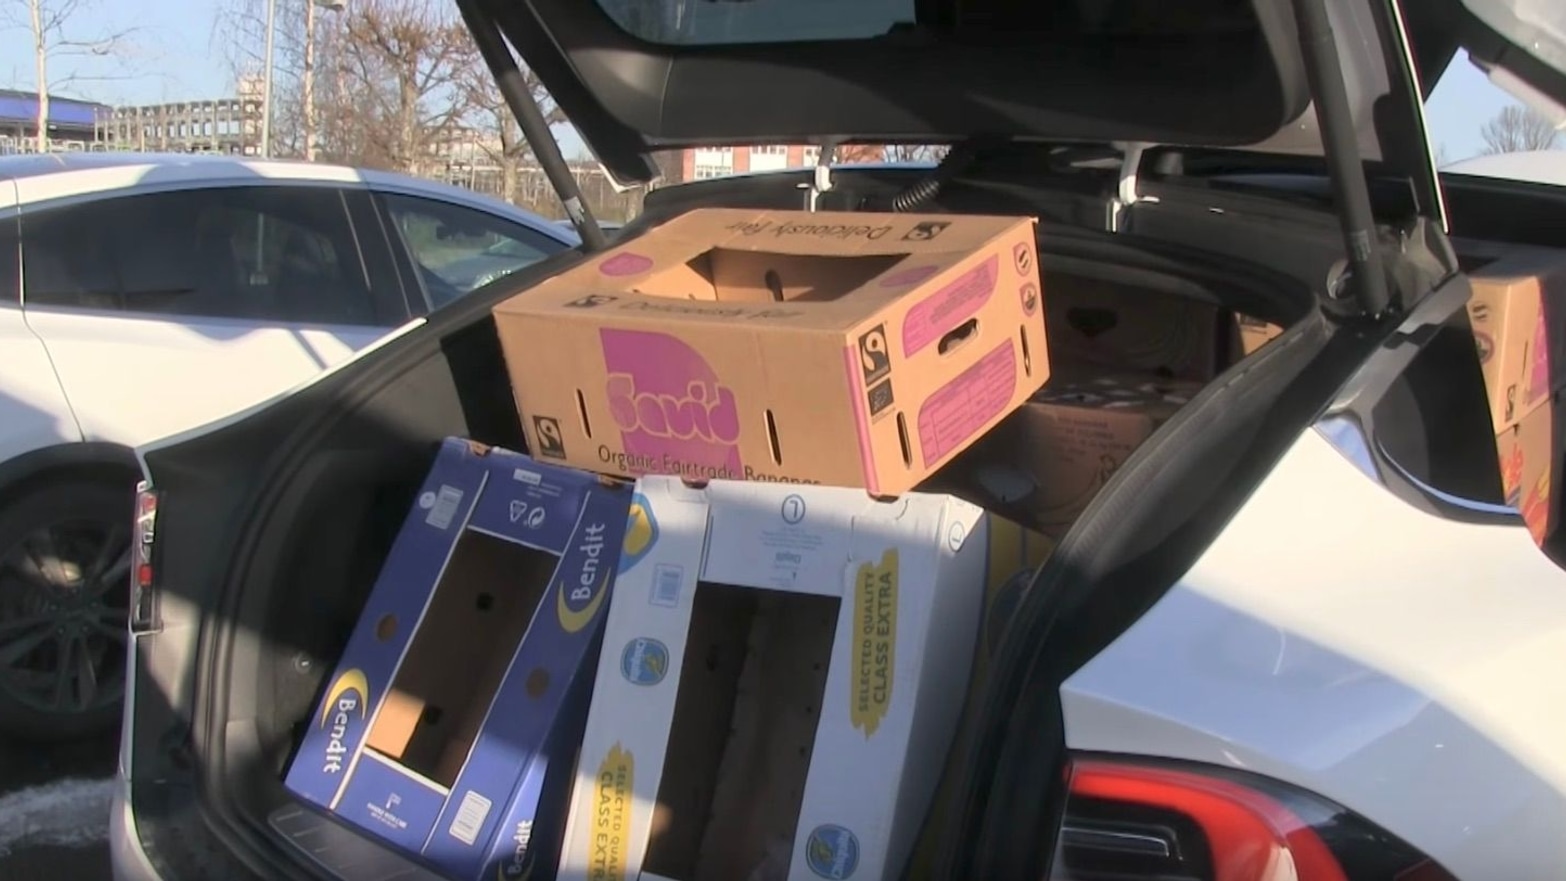 Electric car cargo space challenge with banana boxes